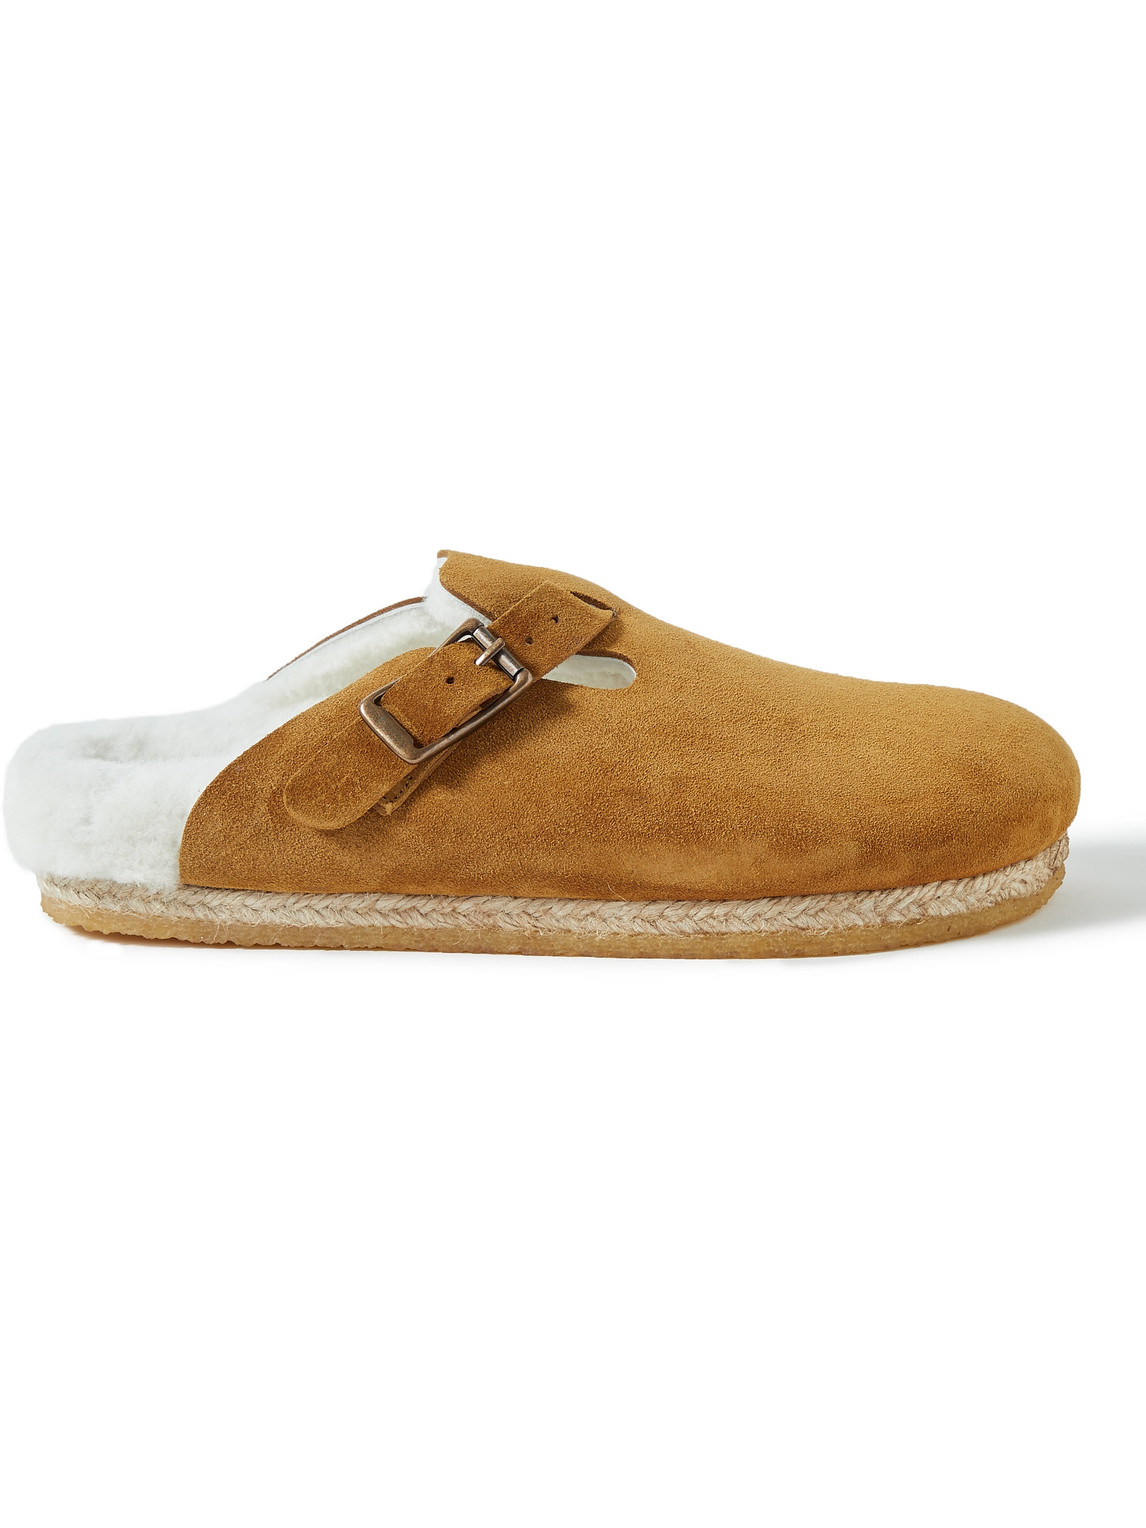 Sal-1 Shearling-Lined Suede Sandals